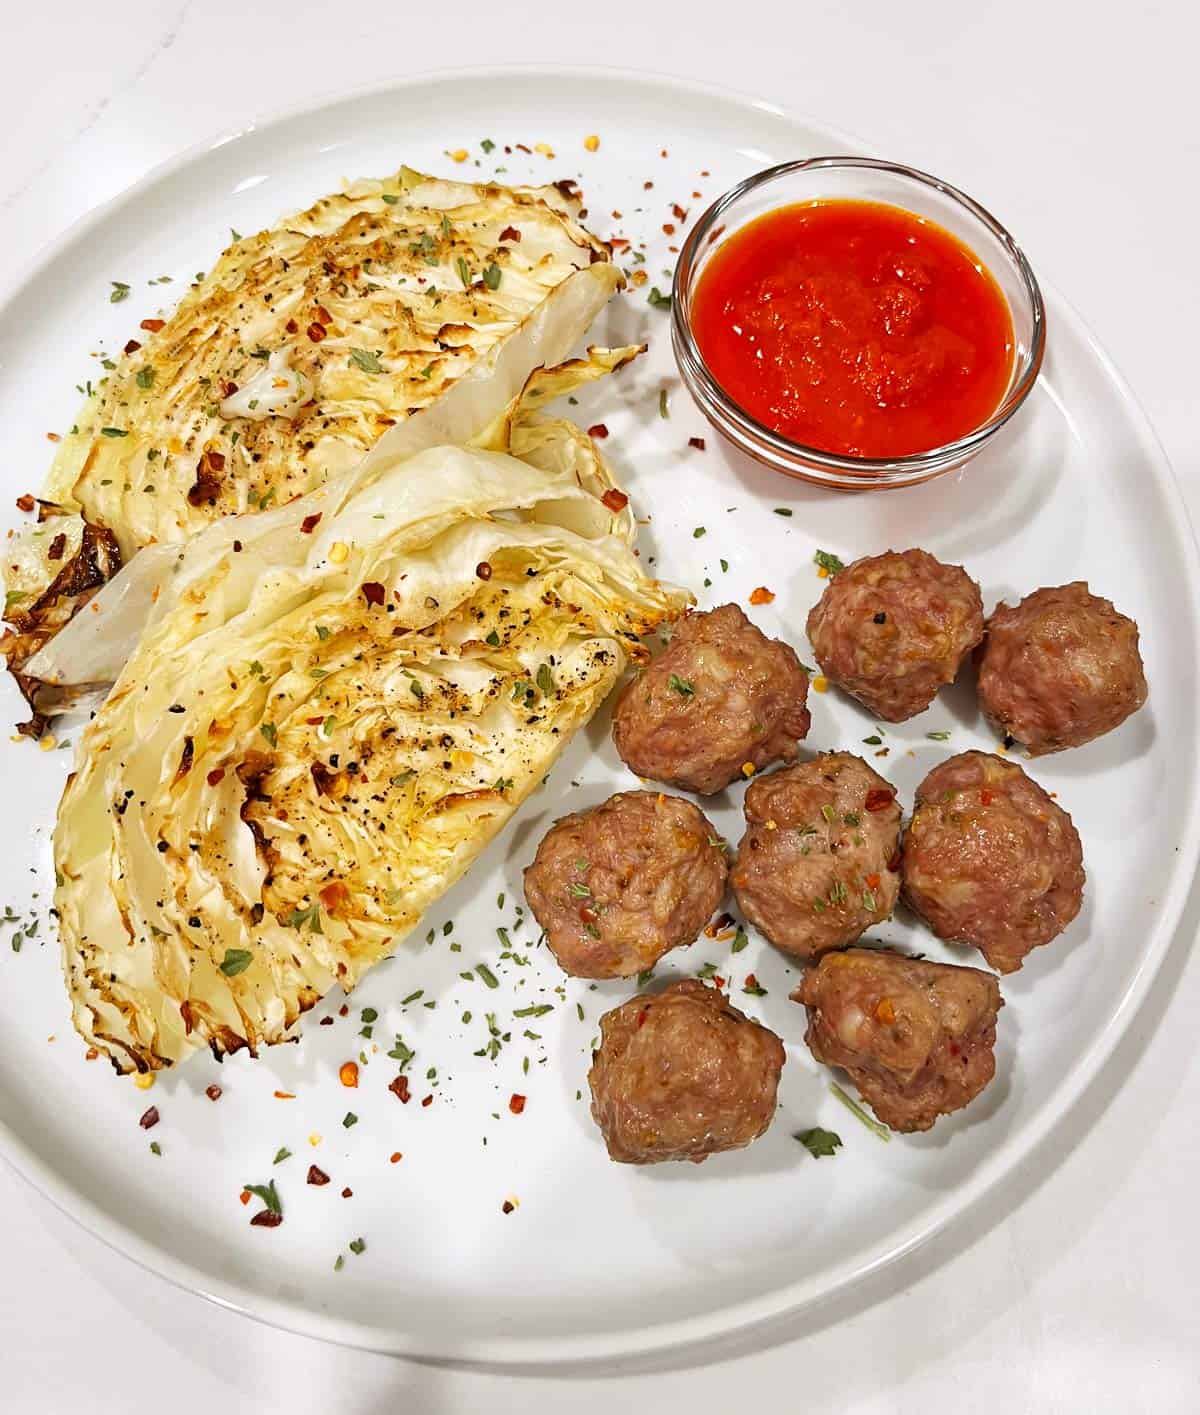 The meatballs are served with roasted cabbage.